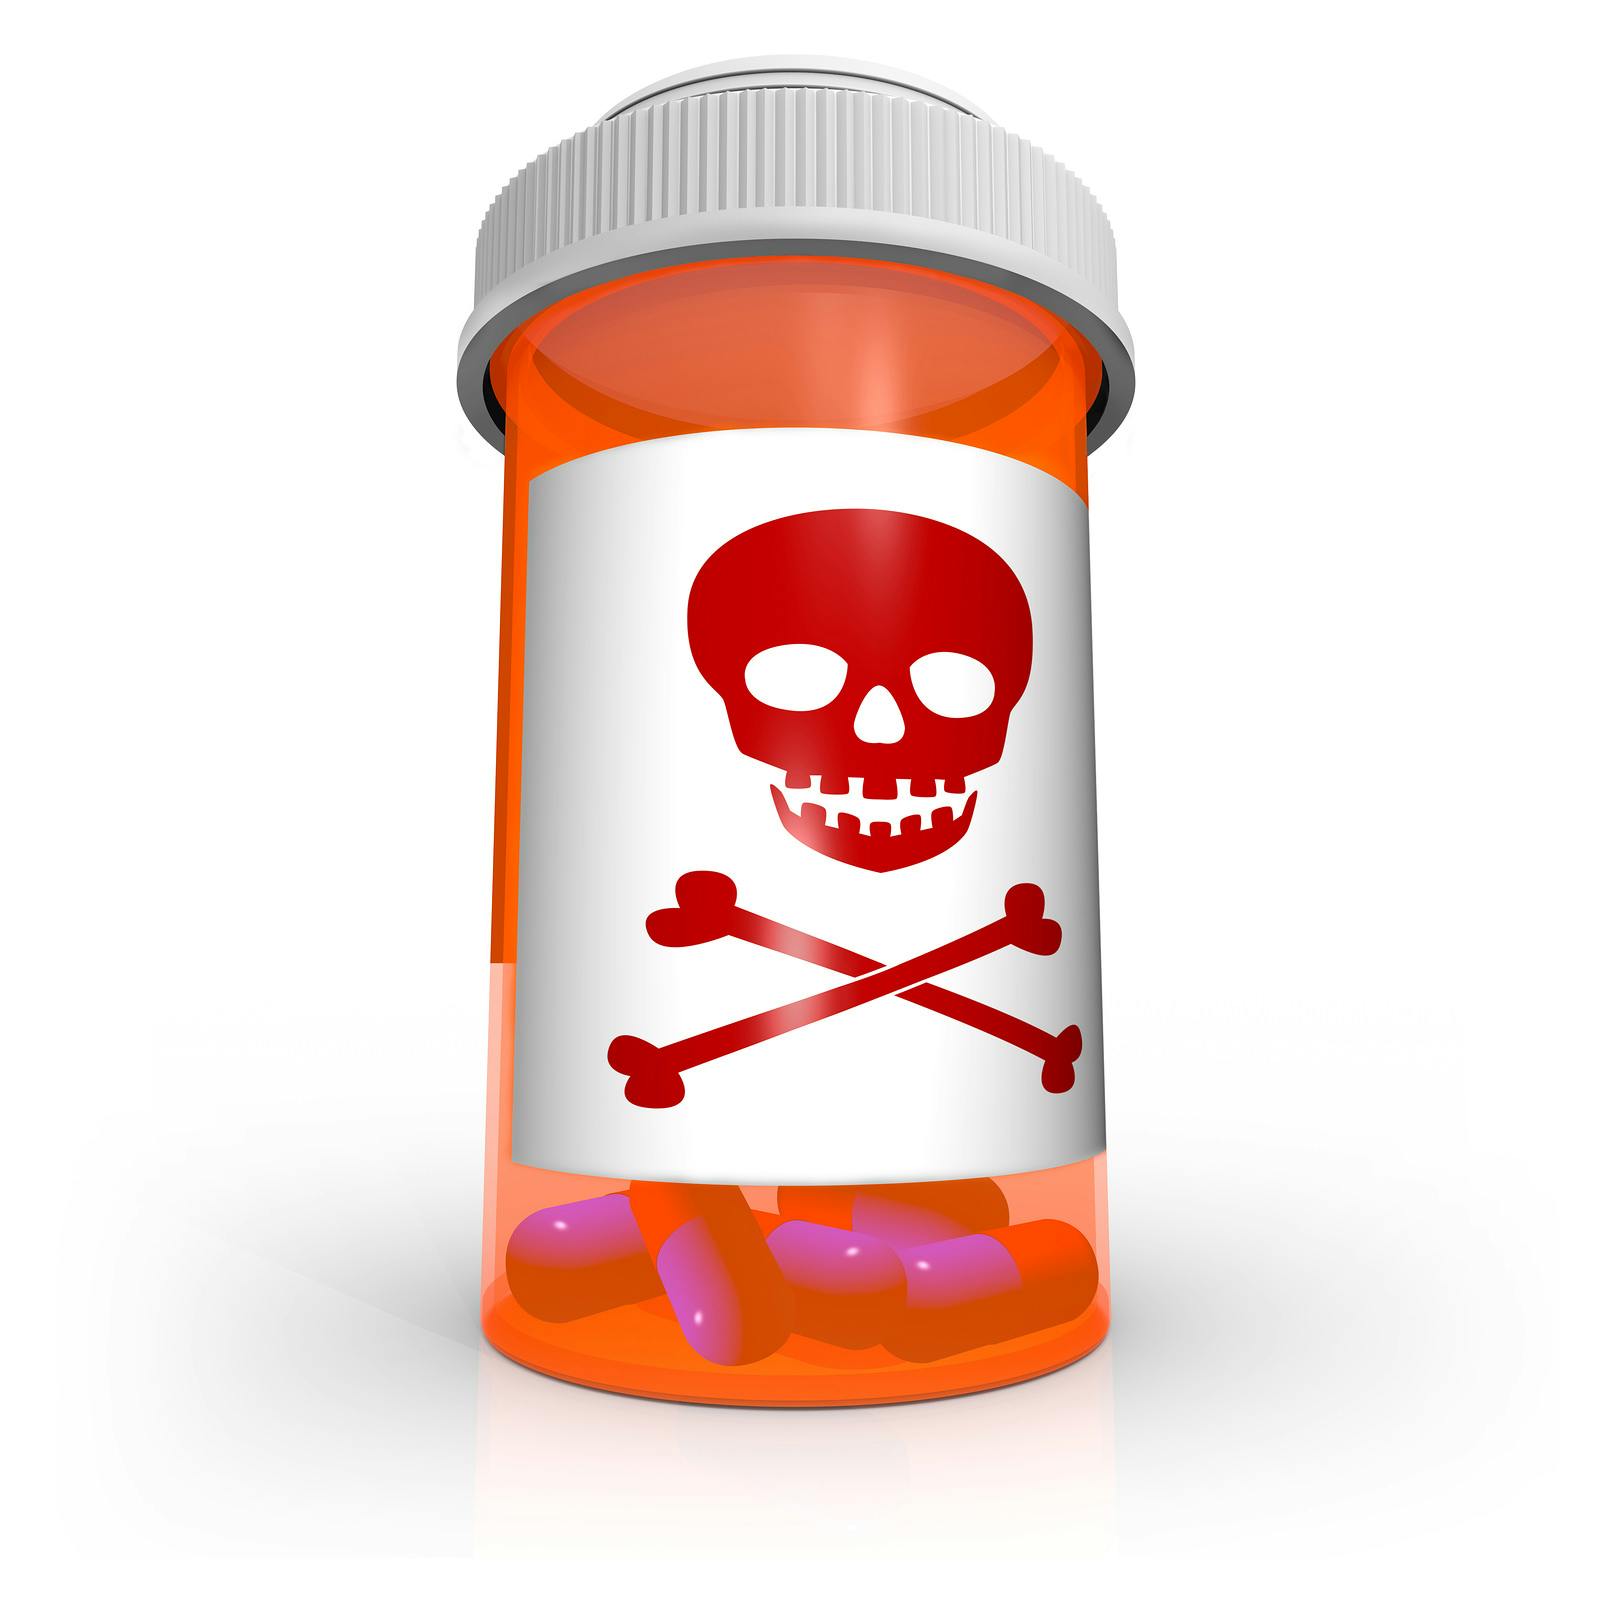 An orange prescription medicine bottle containing blue and red capsule pills and the skull and crossbones warning symbol on the label cautioning you to be careful with this dangerous medication
